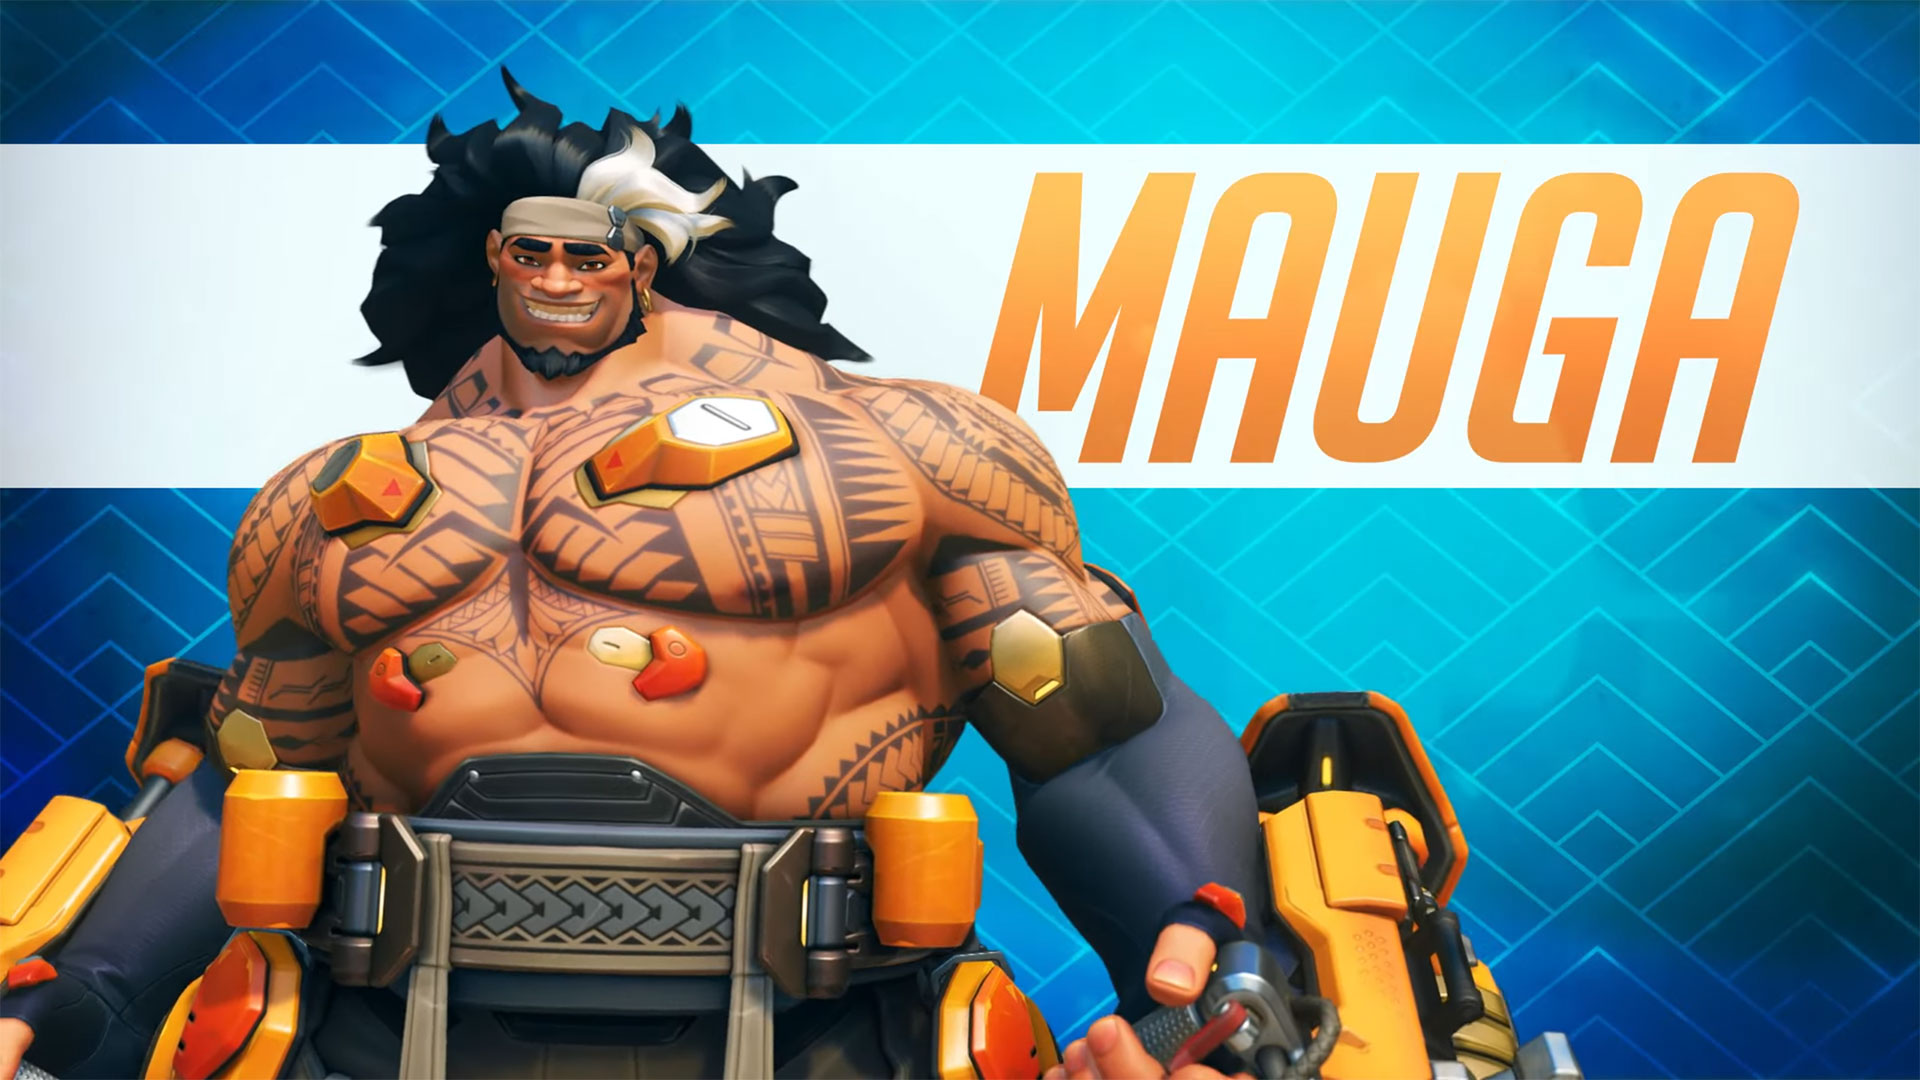 Overwatch 2 is getting a new Tank Hero, Mauga